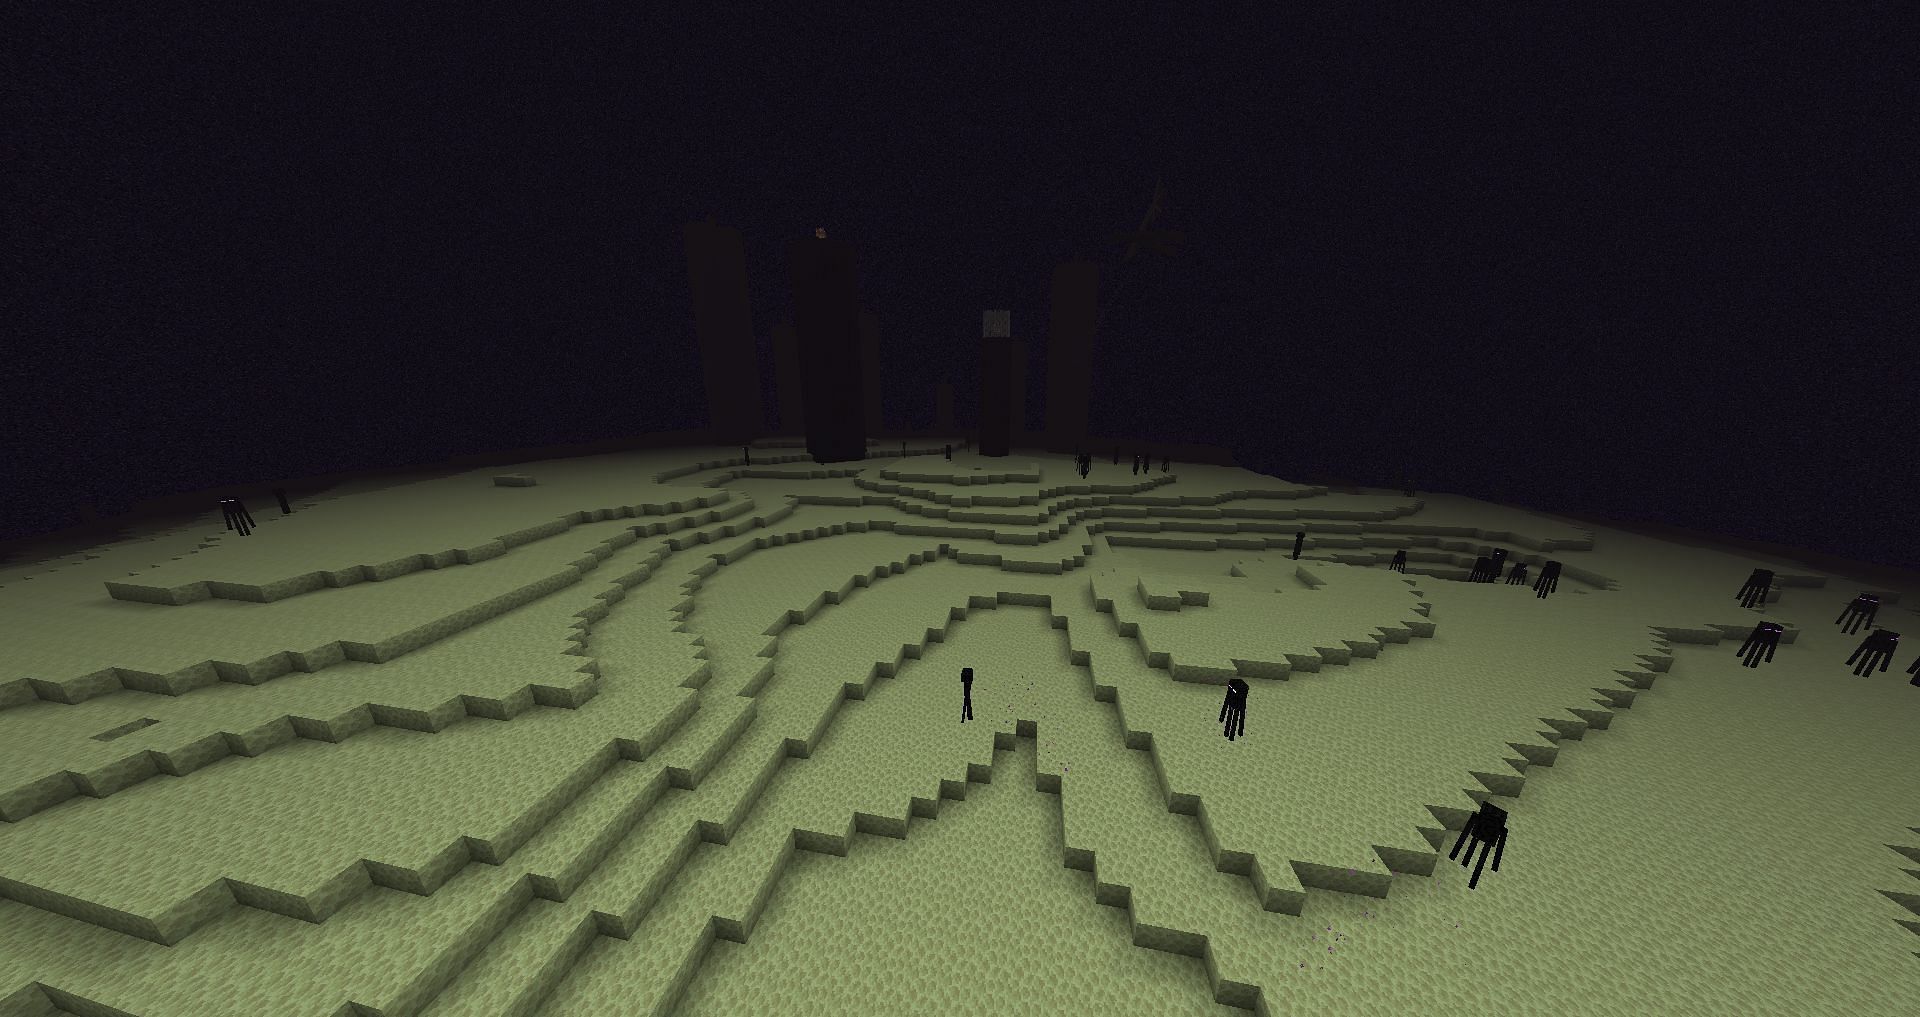 The End is one of three dimensions in Minecraft. (Image via Mojang)